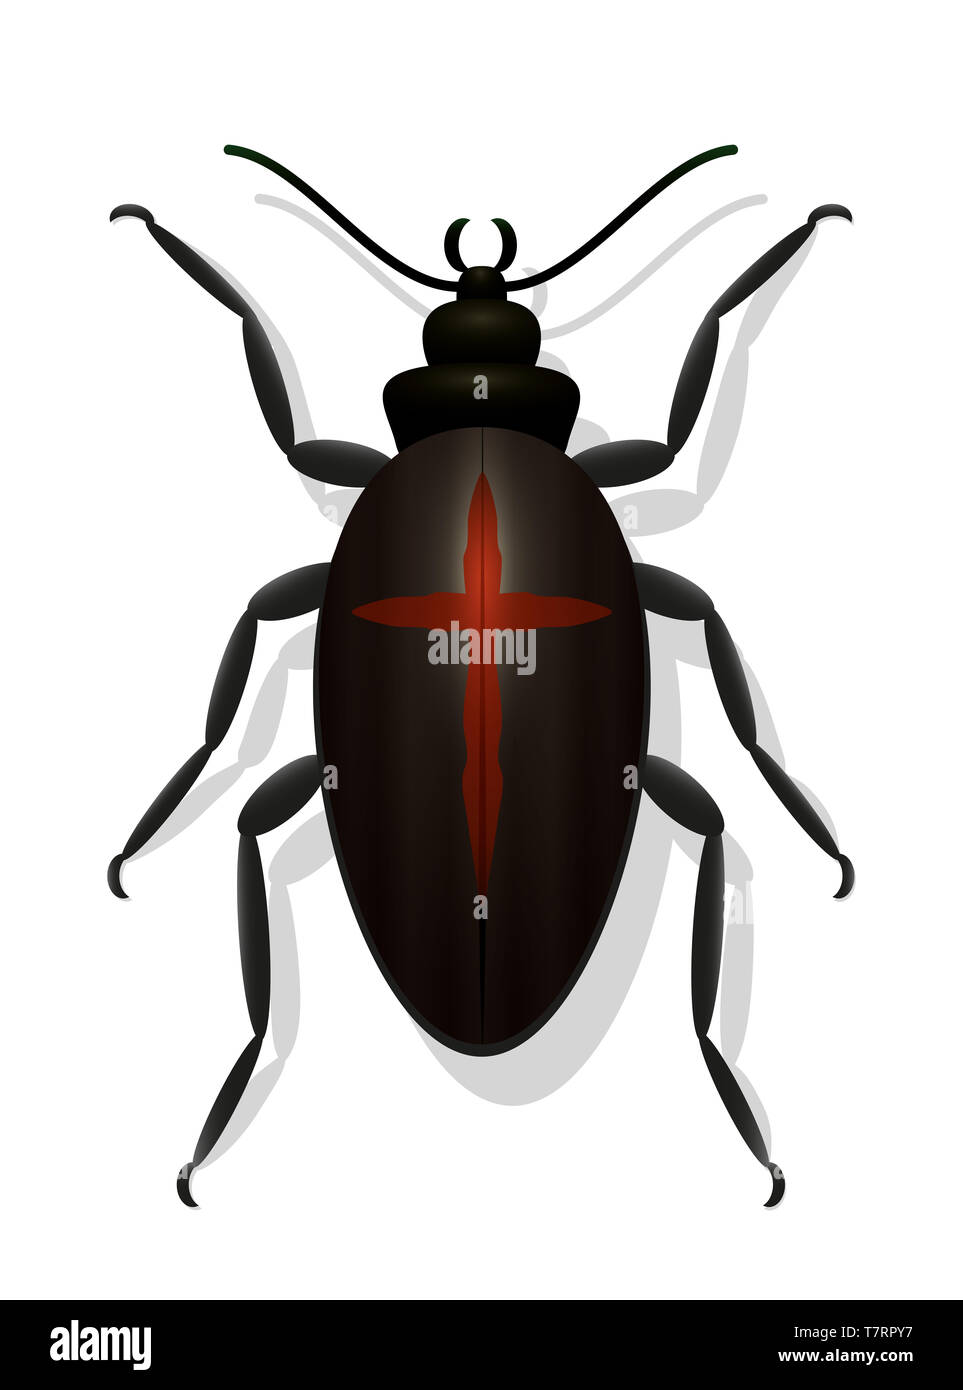 Black bug with red cross. Black widow beetle. Symbolic for dangerous, toxic, poisonous insects or for decline in insect populations. Stock Photo